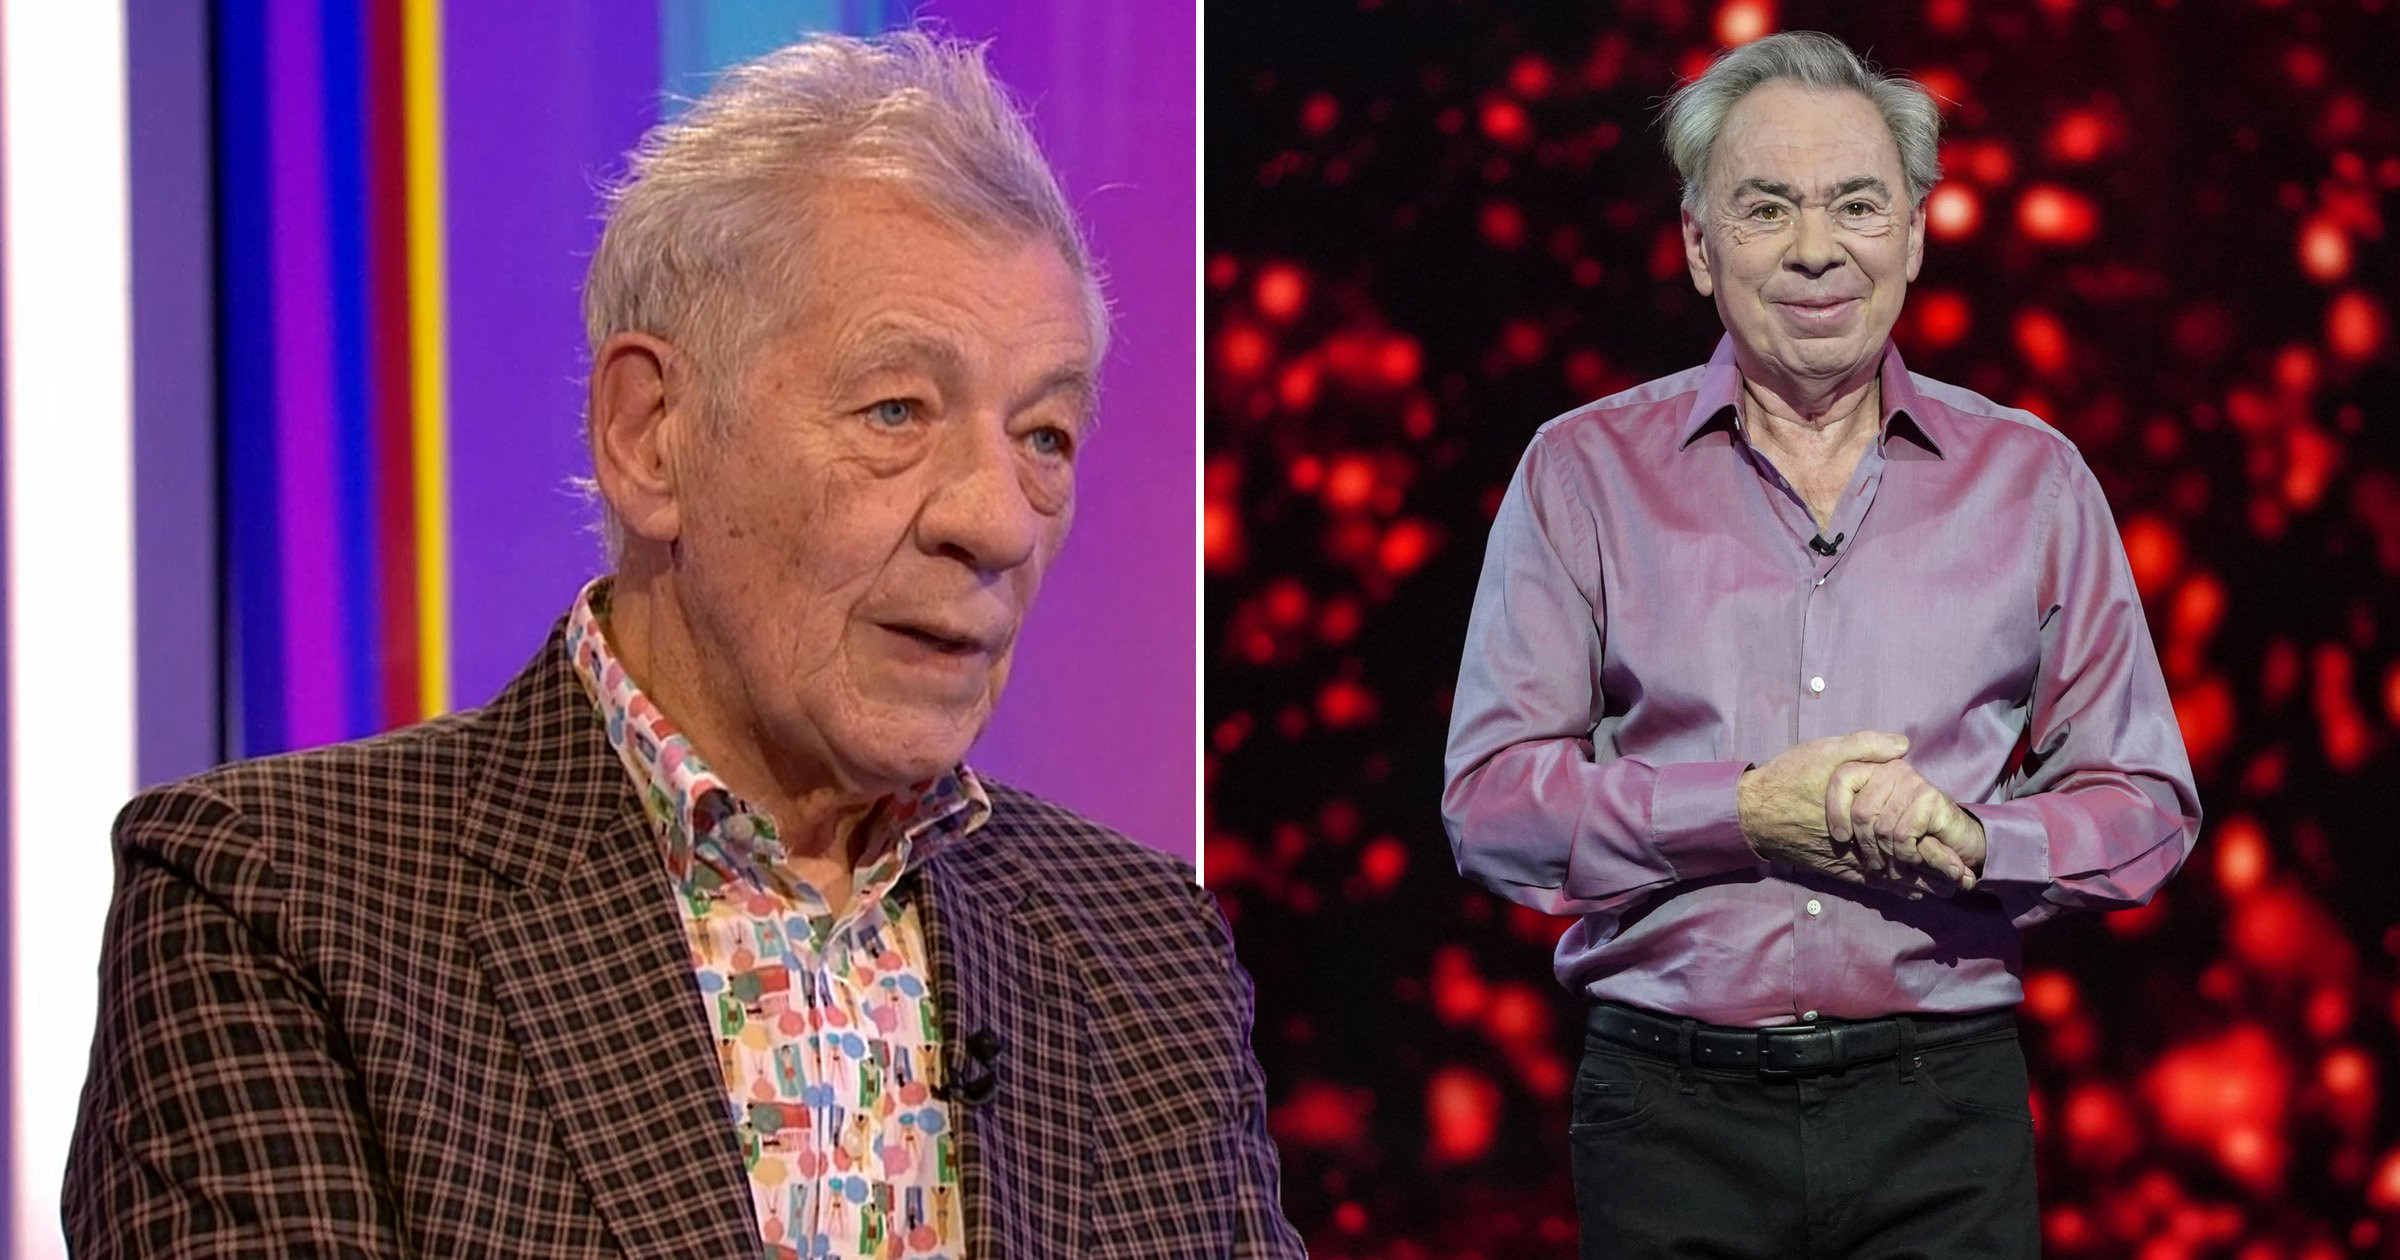 Sir Ian McKellen says Andrew Lloyd Webber ‘right to get passionate about theatre’ but ‘prison’s going a bit far’